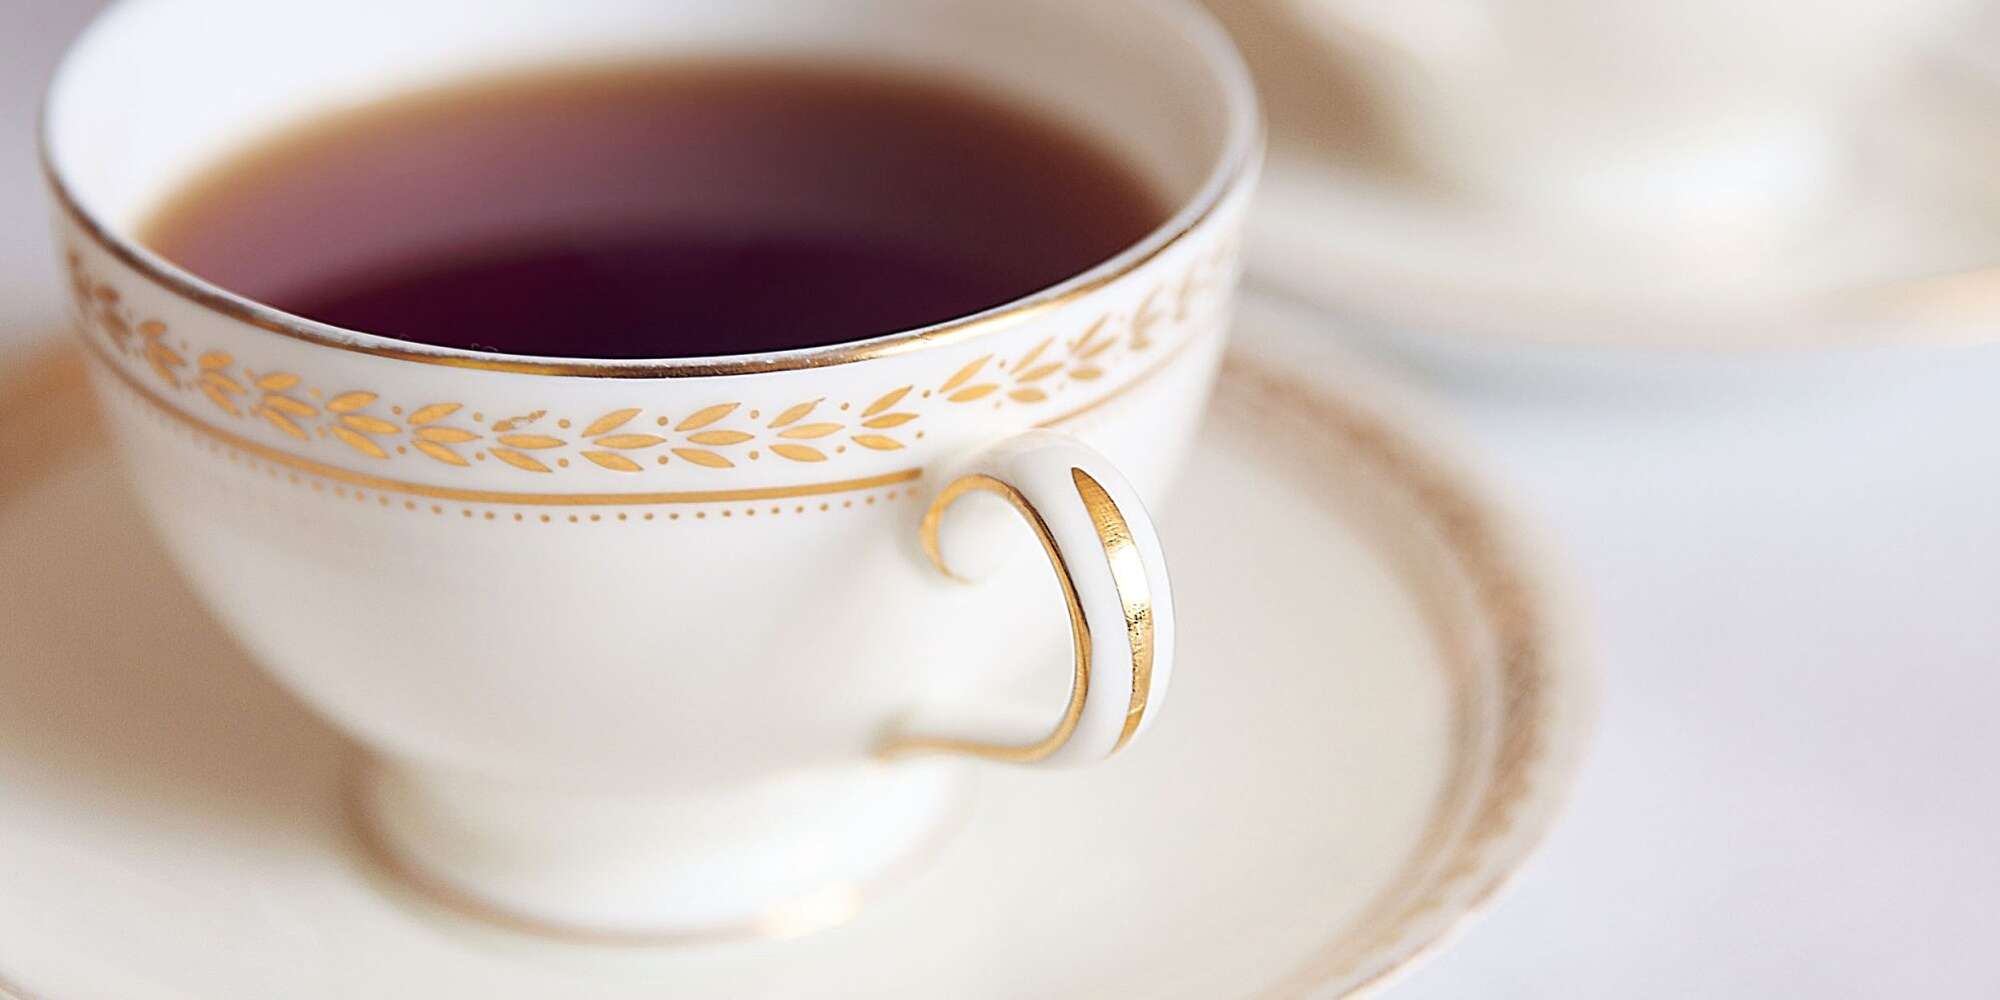 Best English breakfast teas for the perfect cuppa in 2024 